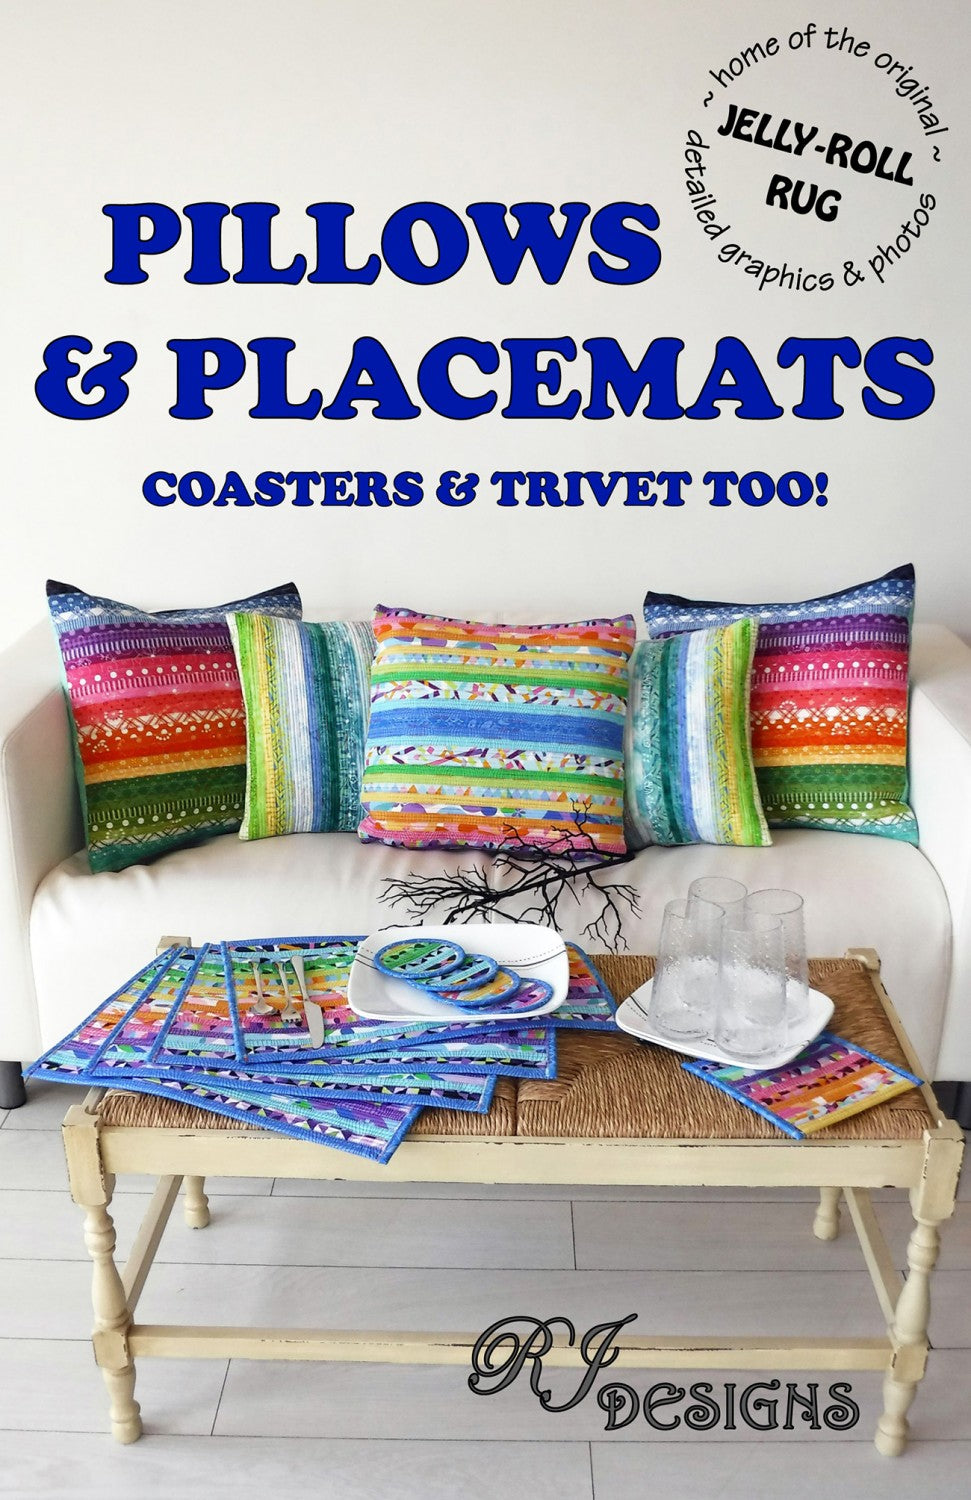 Pillows and Placemats - RJD200 - R.J. Designs